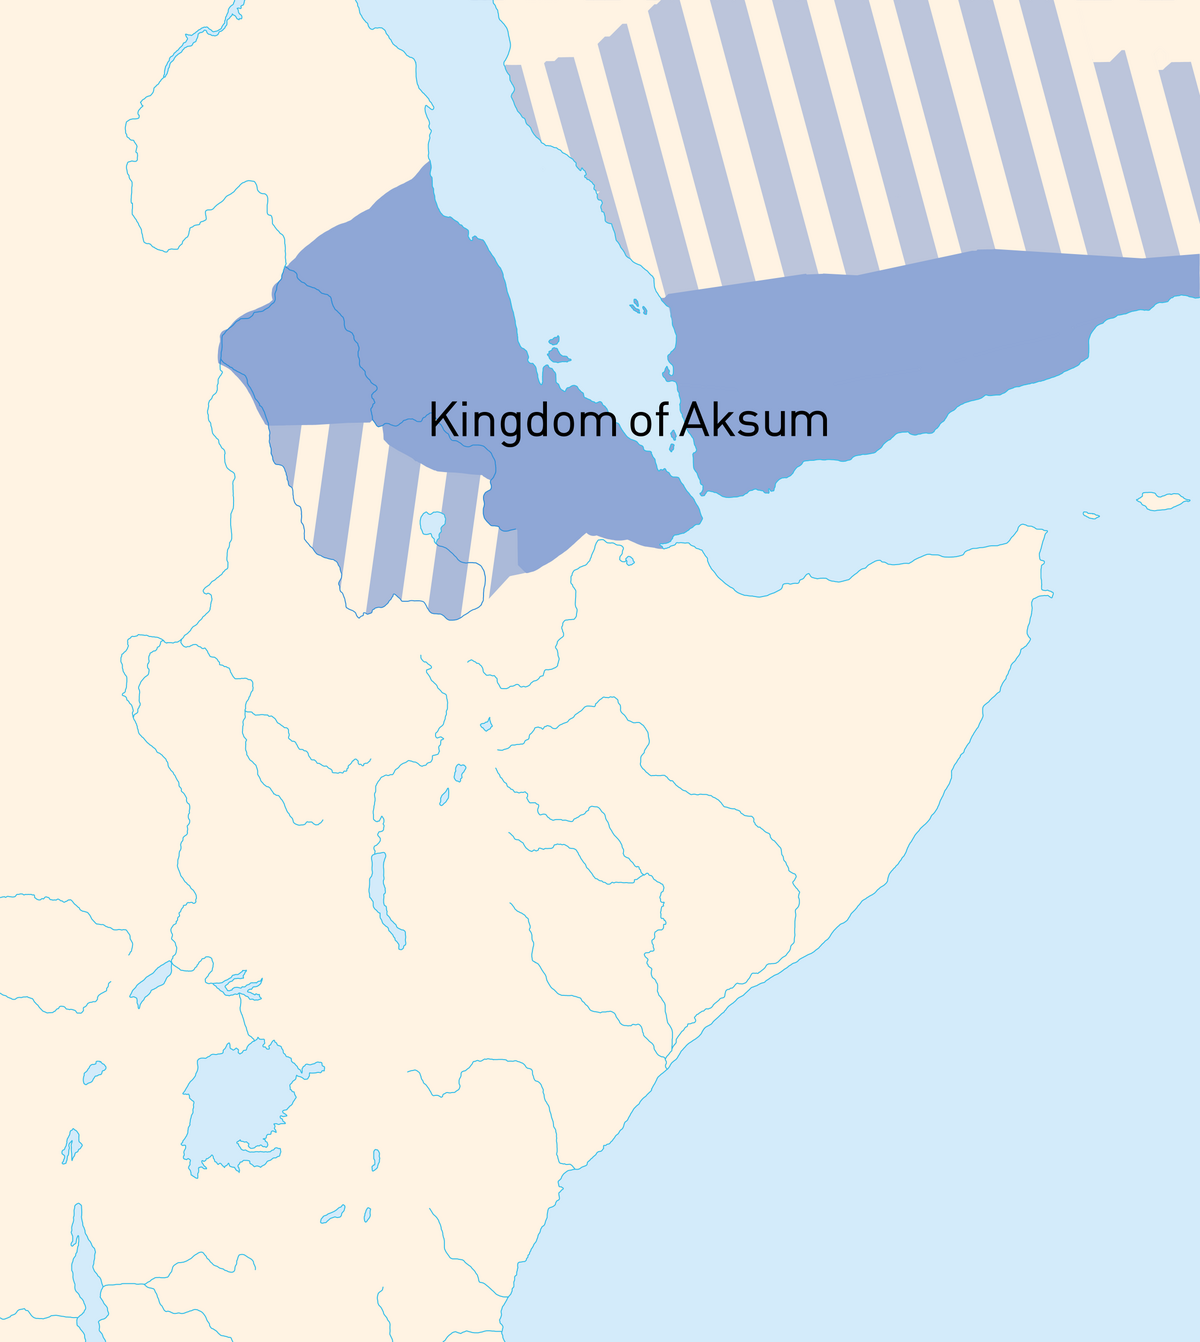 1200px-The_Kingdom_of_Aksum.png